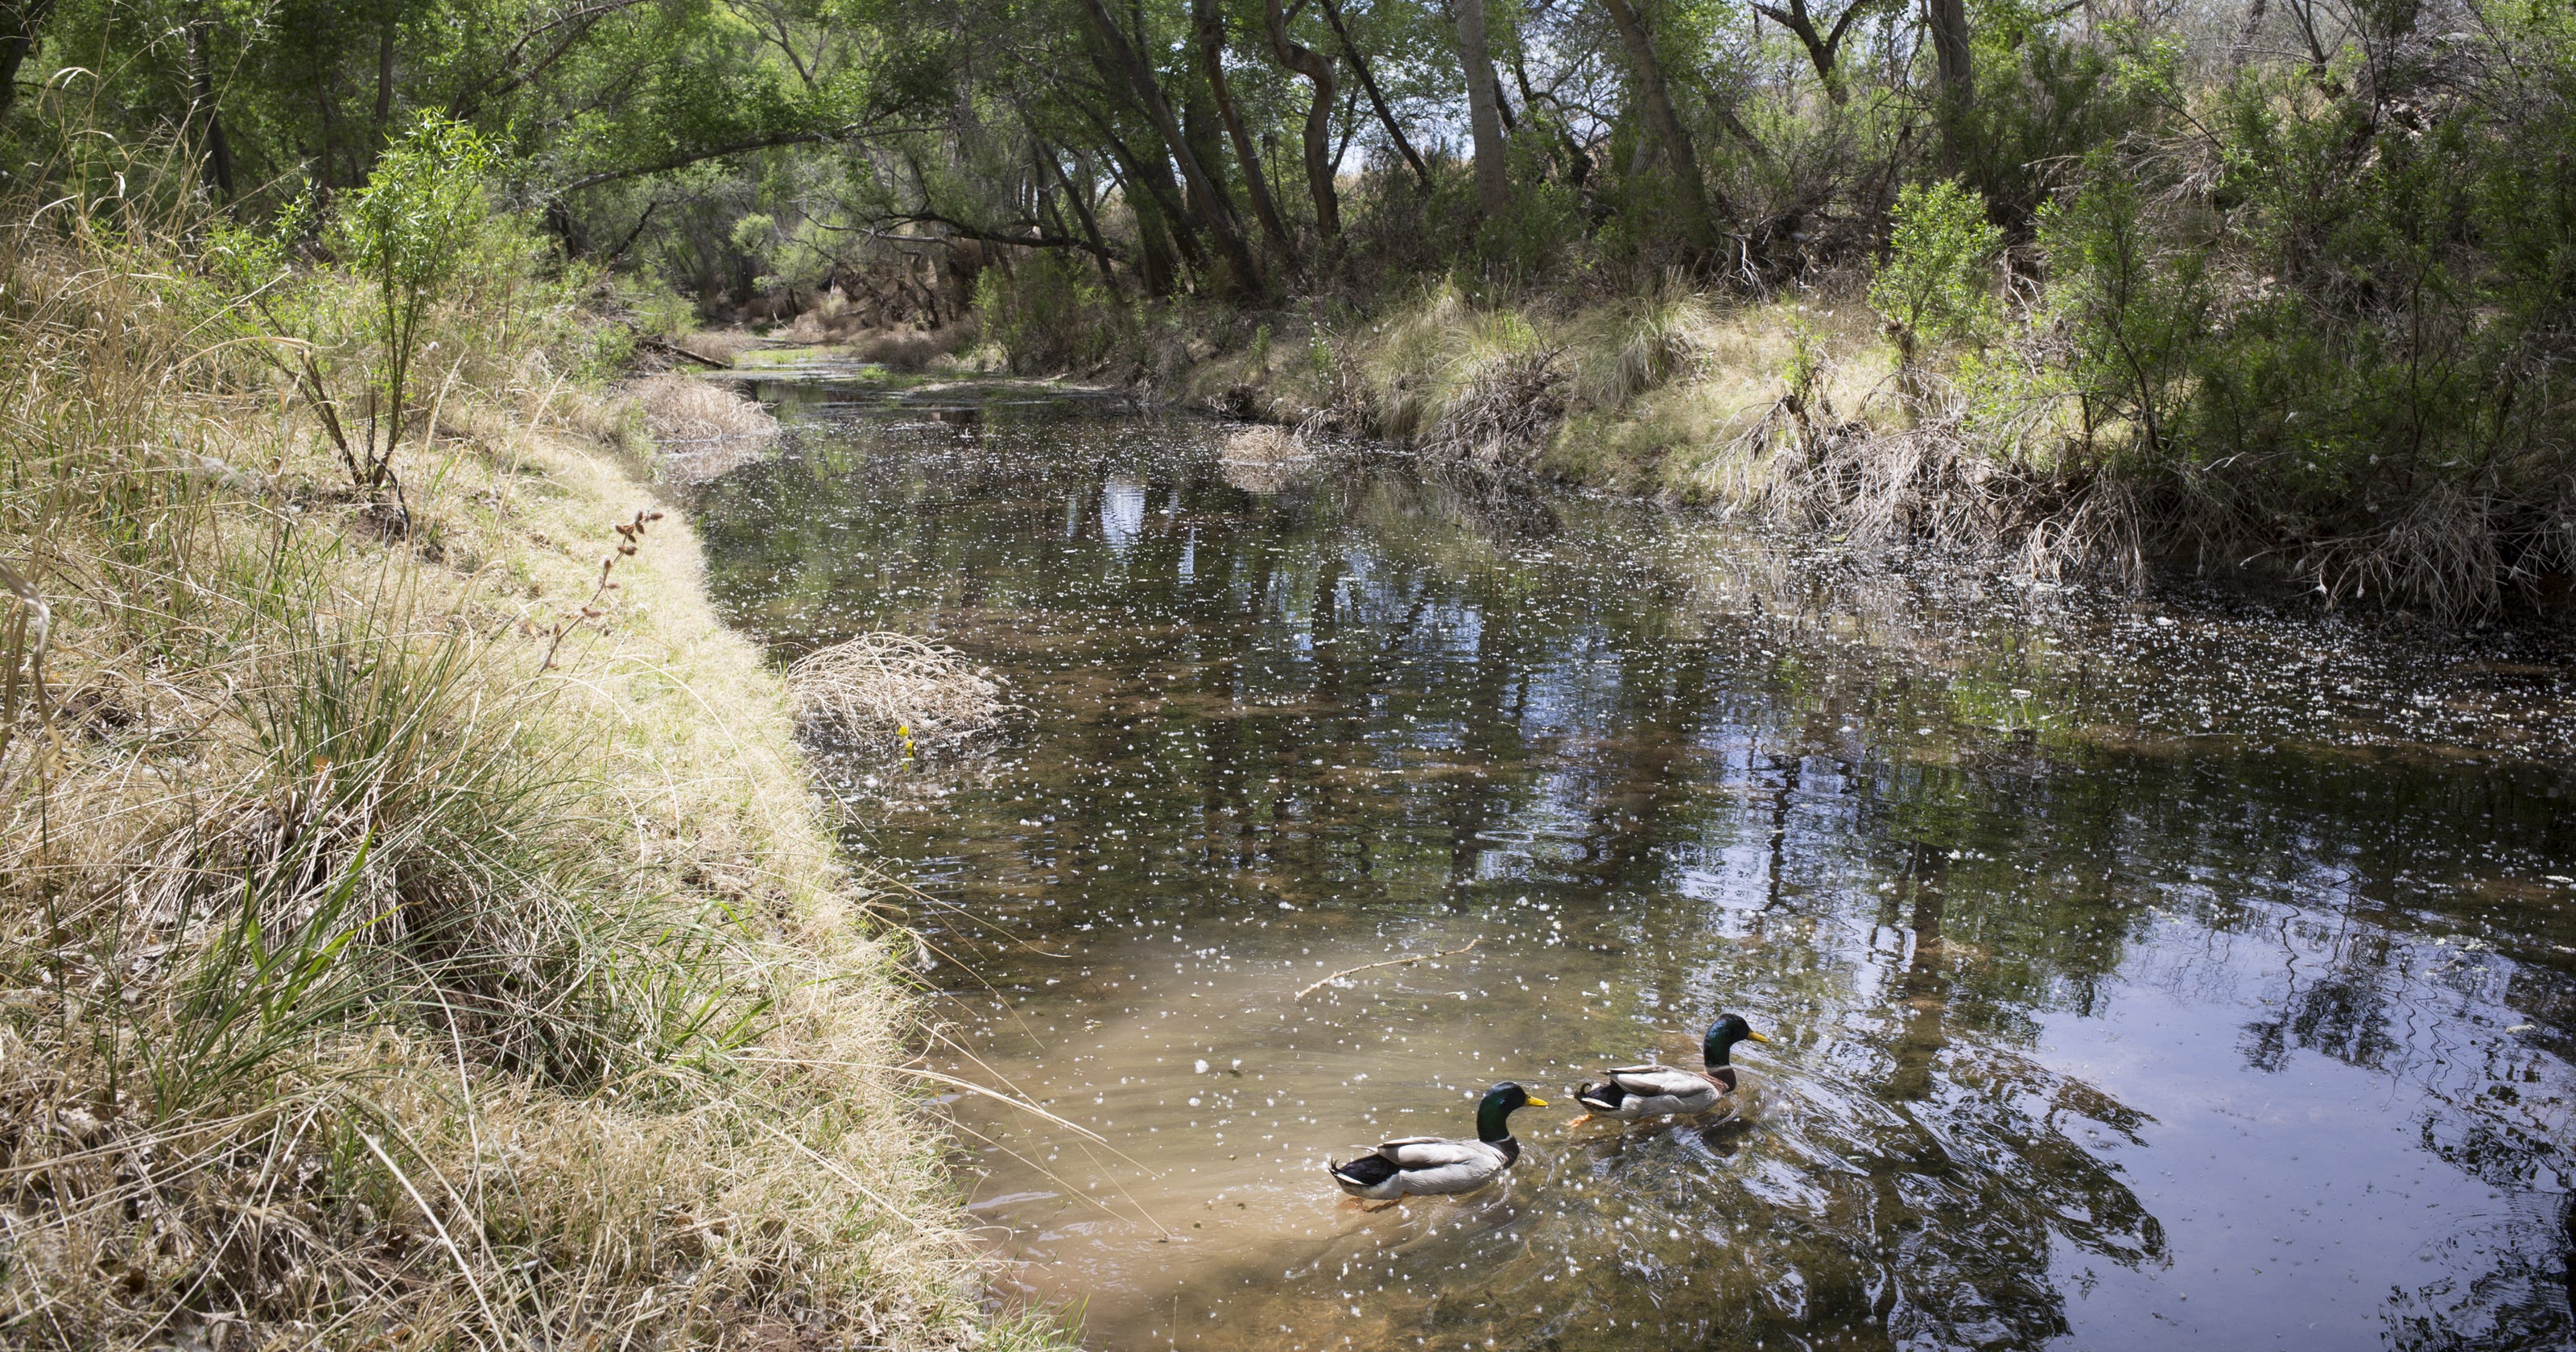 Villages at Vigneto is no major threat to the San Pedro River. Let's stick to the facts - AZCentral